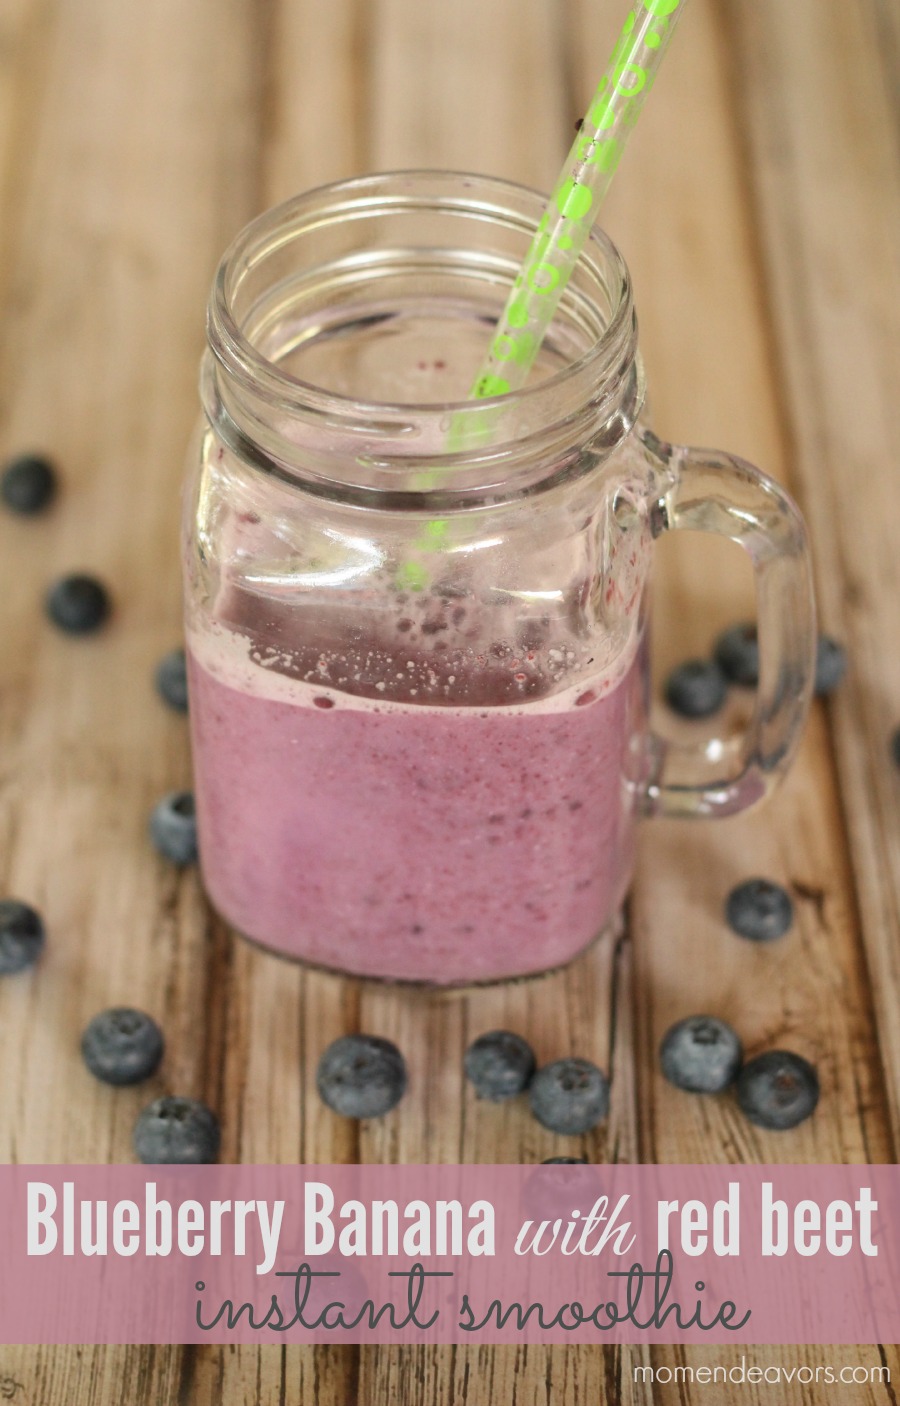 Quick Blueberry Banana with Red Beet Smoothie #DoleShakers